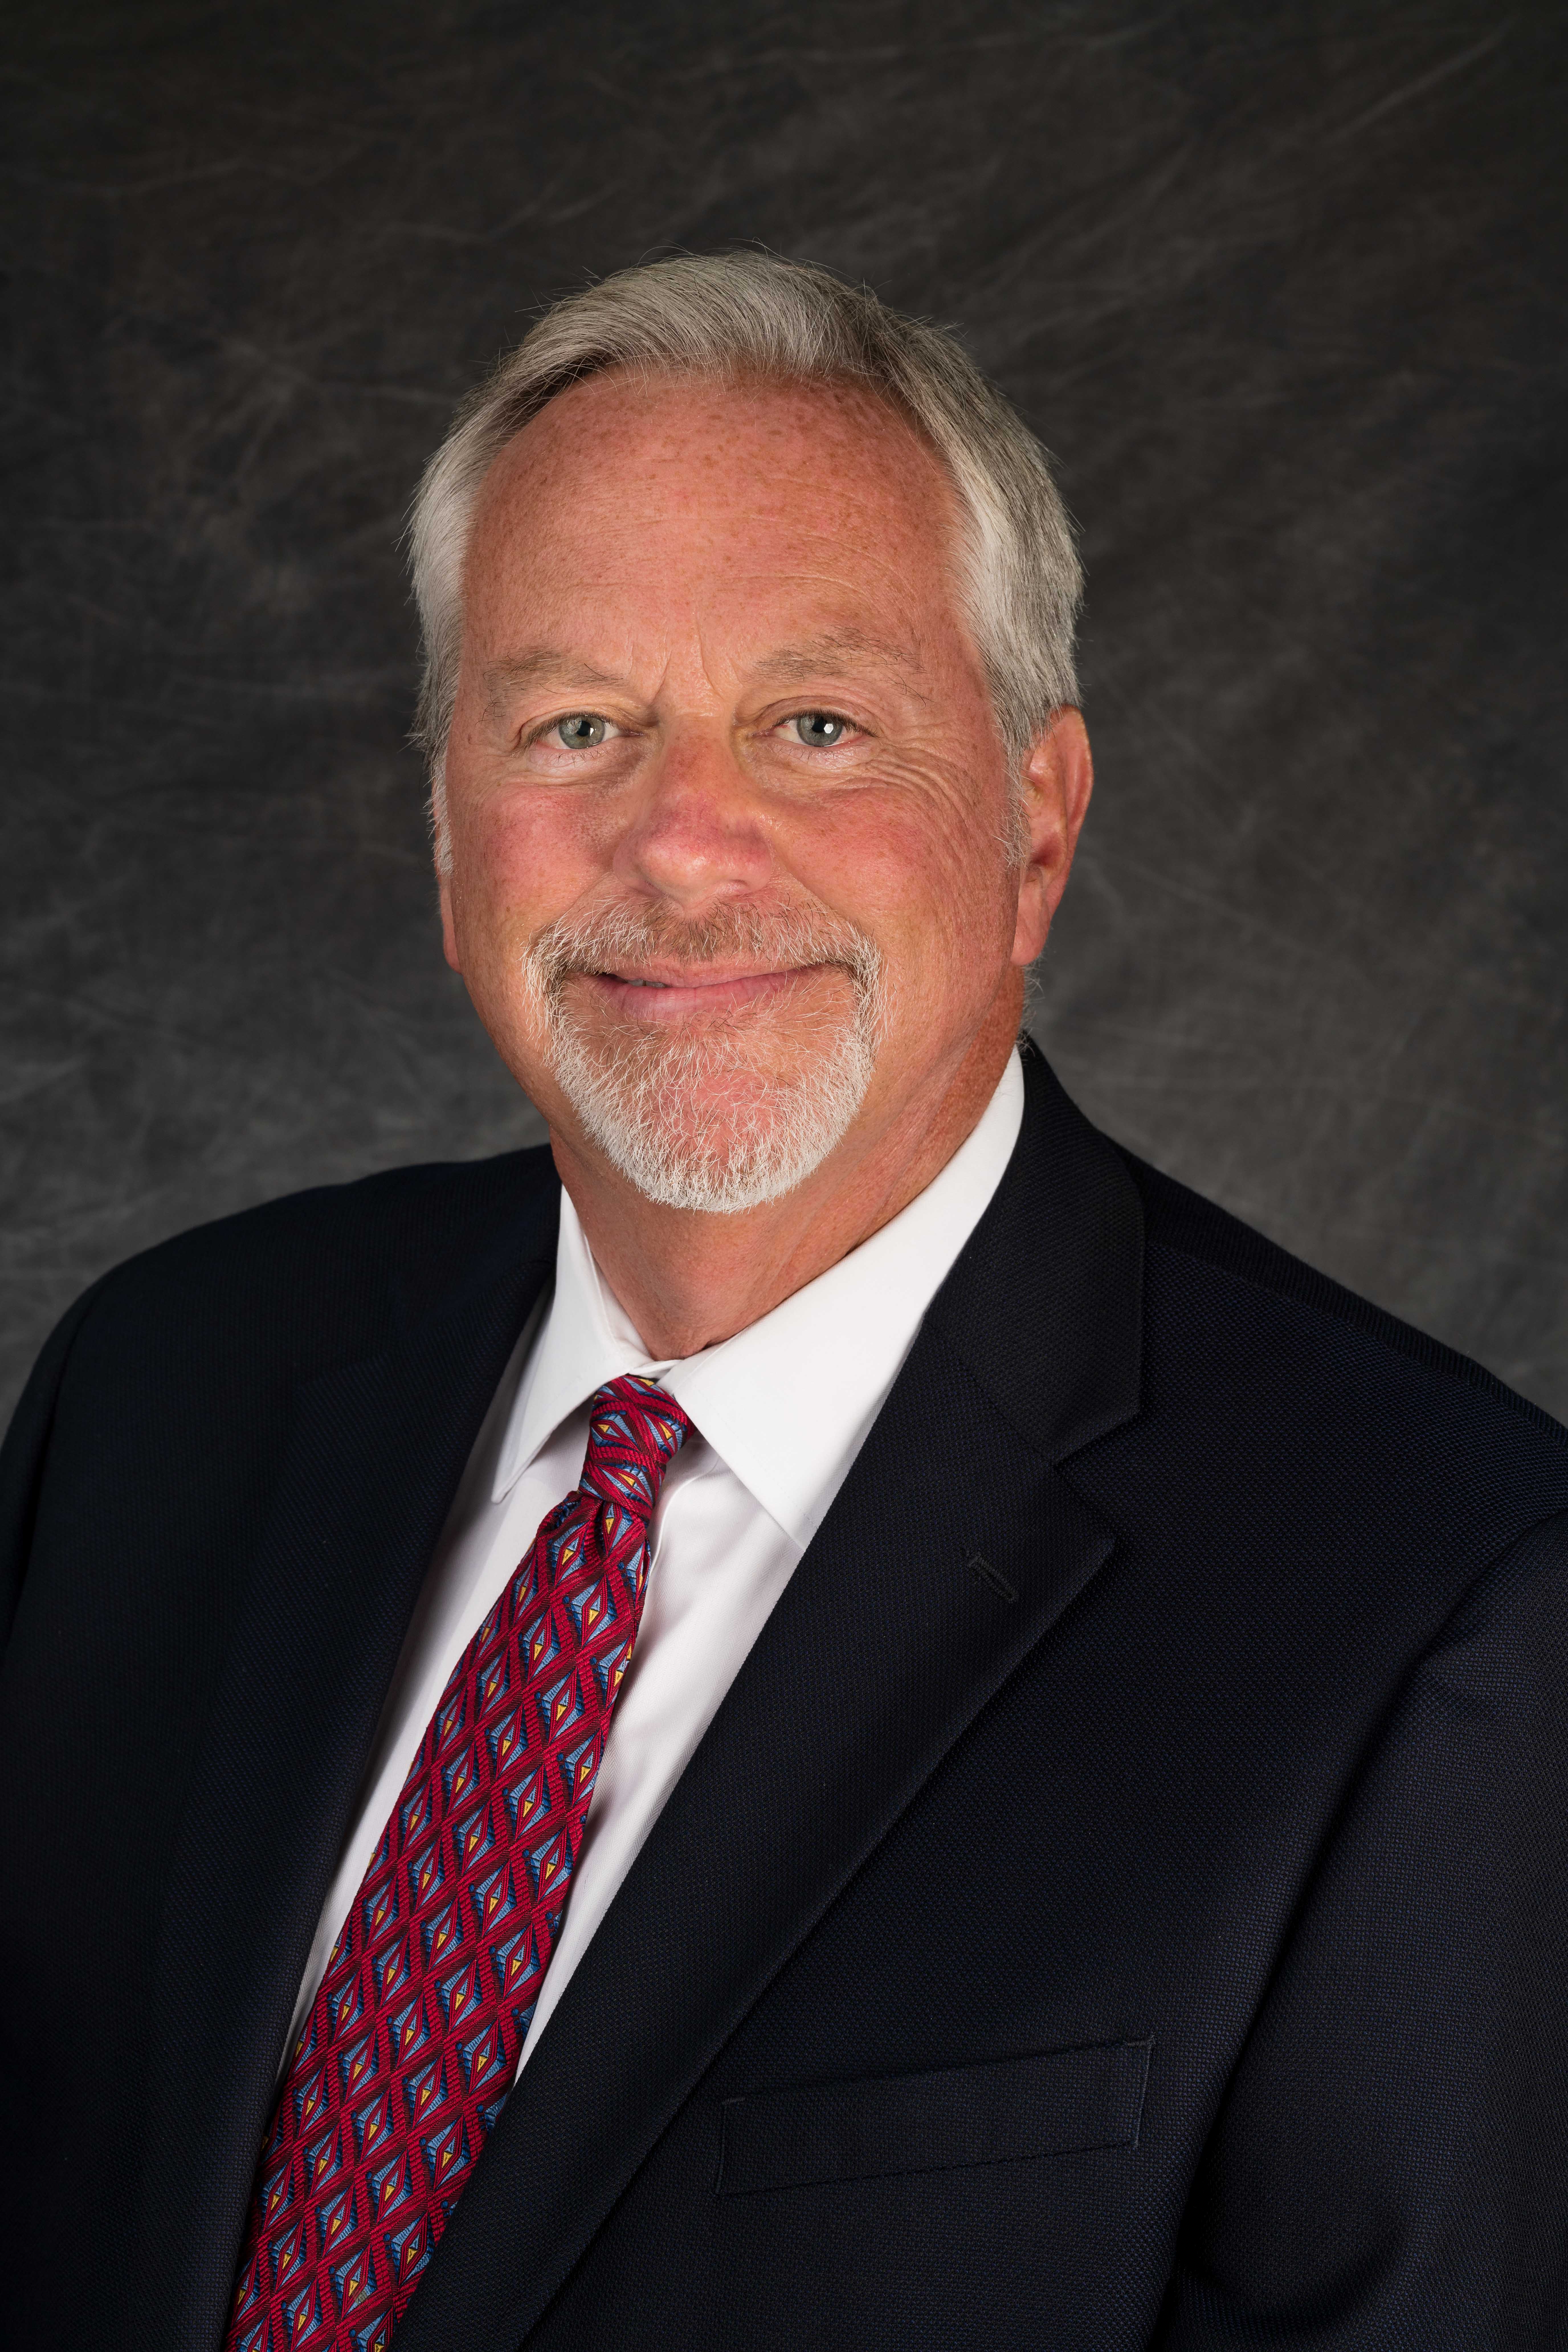 Retired Wells Fargo executive Gary Orr has been named to the Board of Directors for River City Bank.